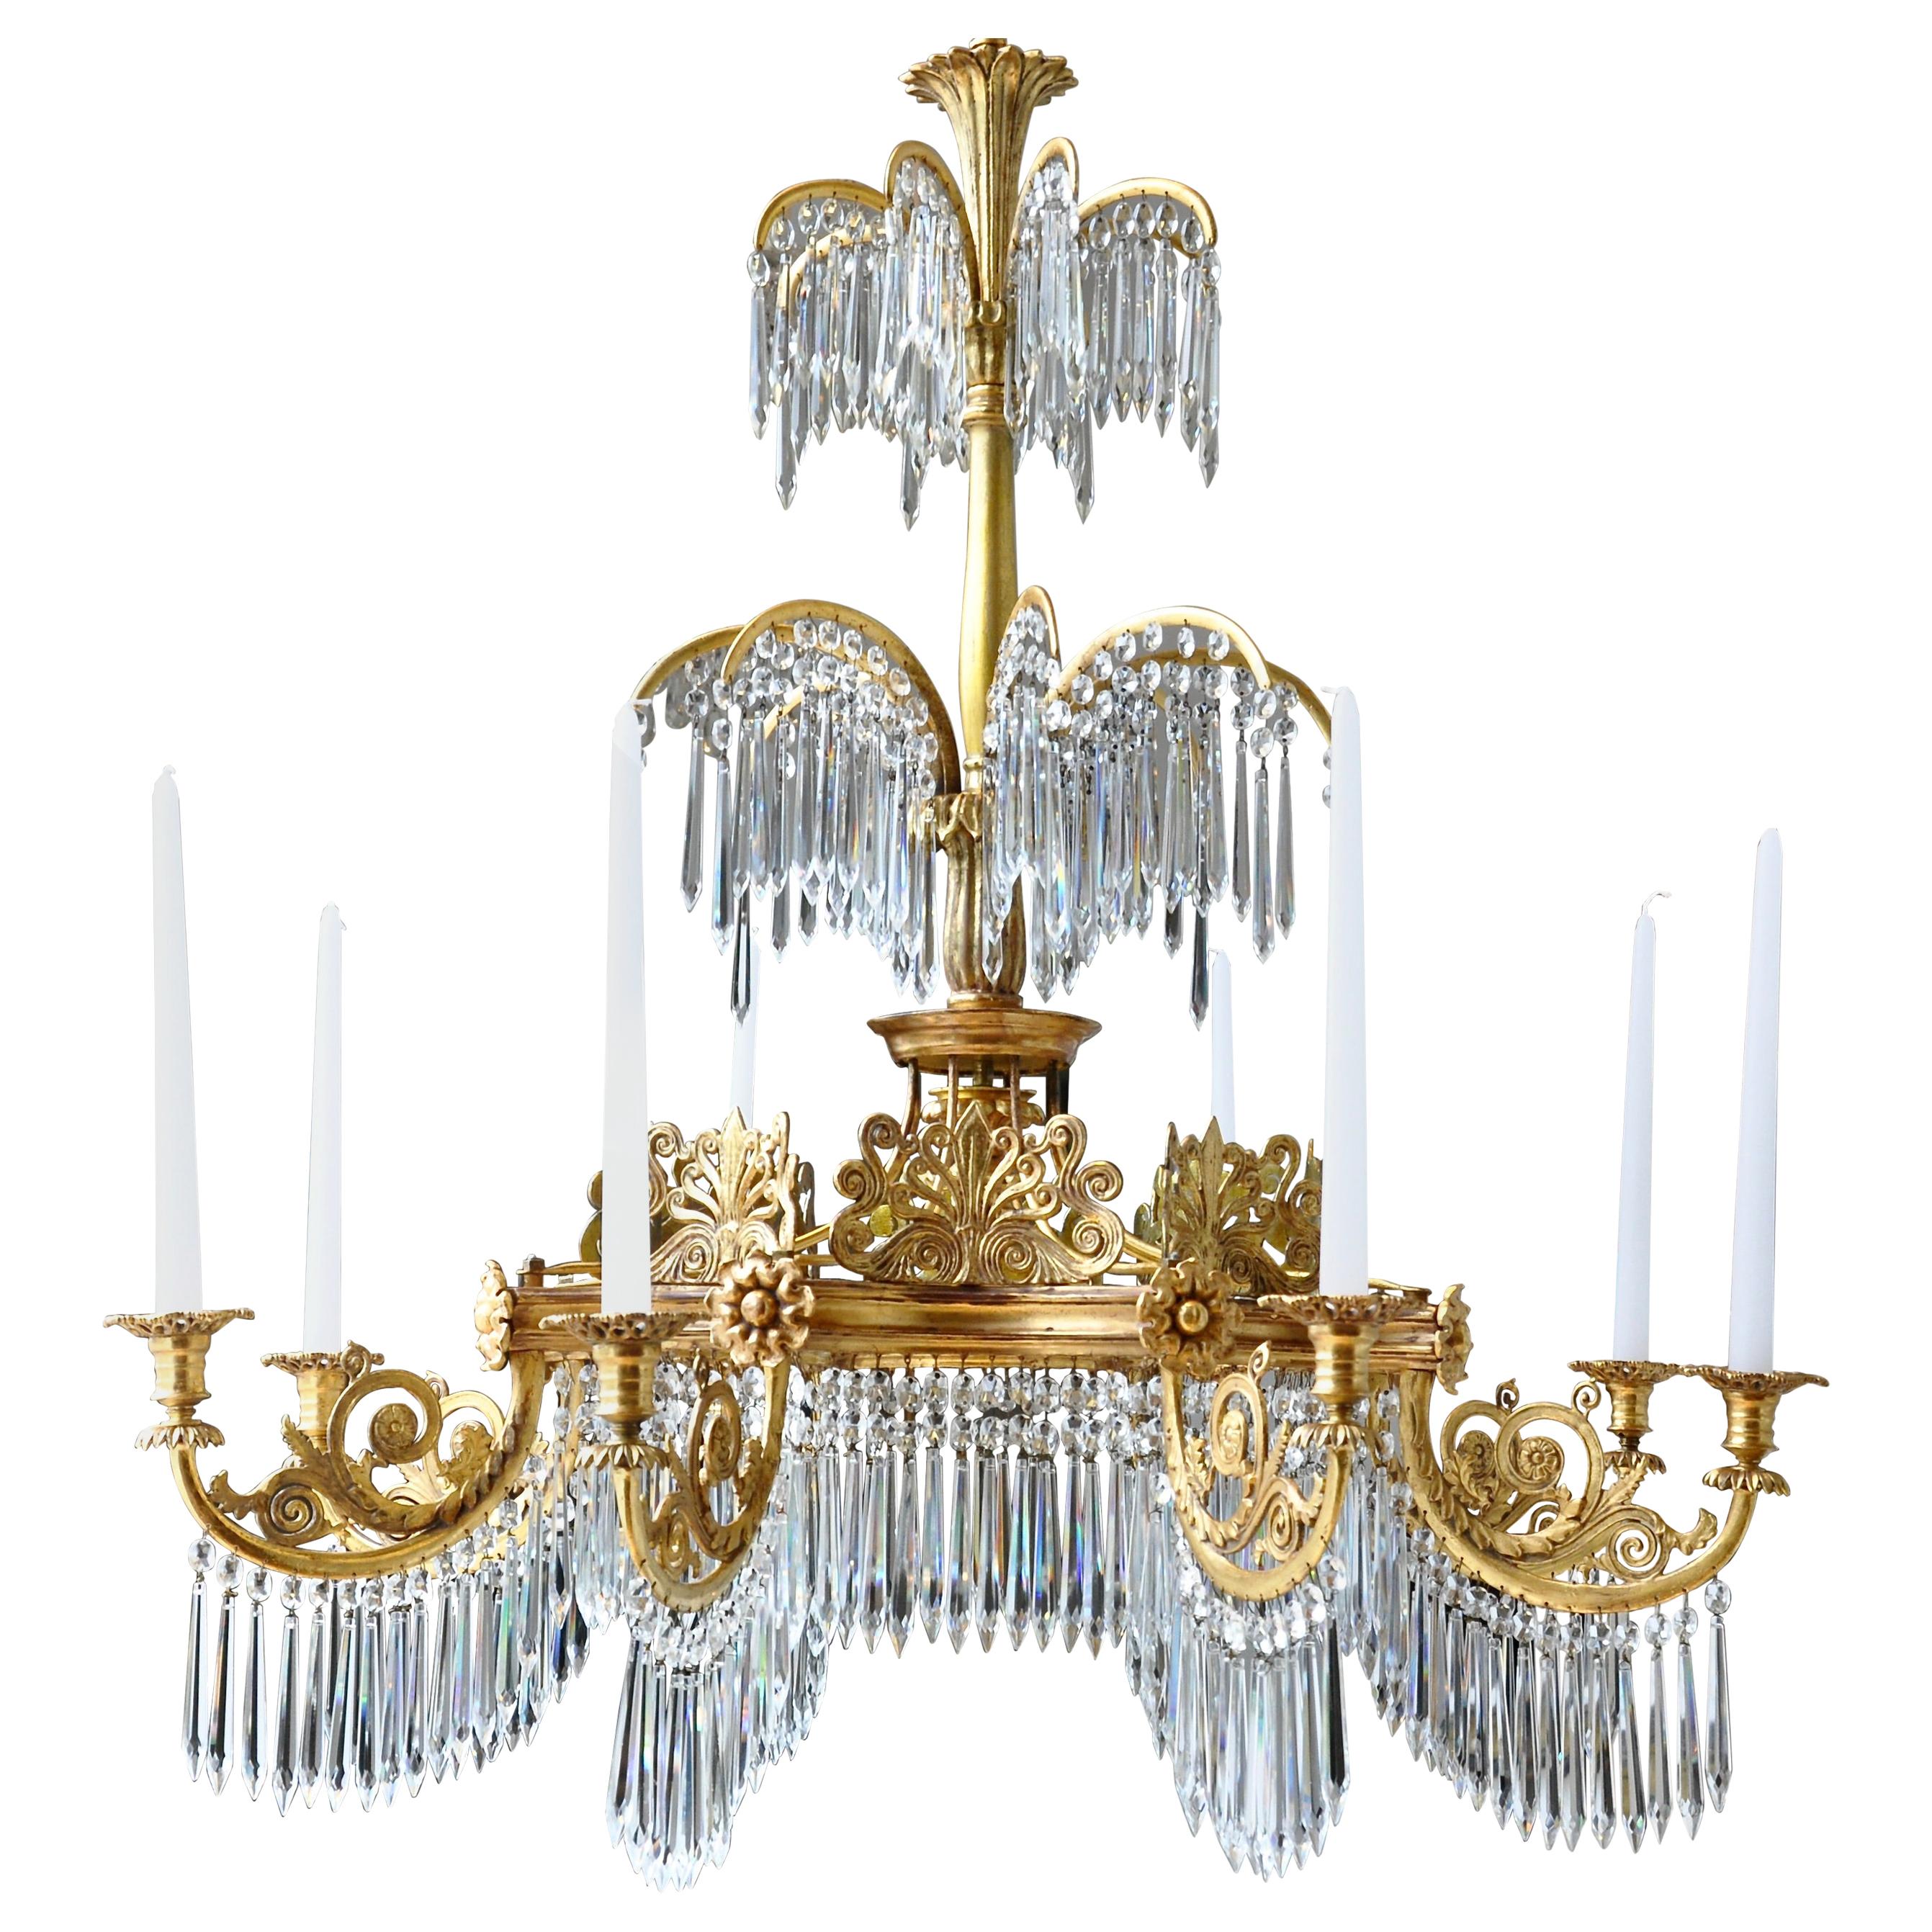 Early 19th Century Gilt Neoclassical Chandelier by Schinkel